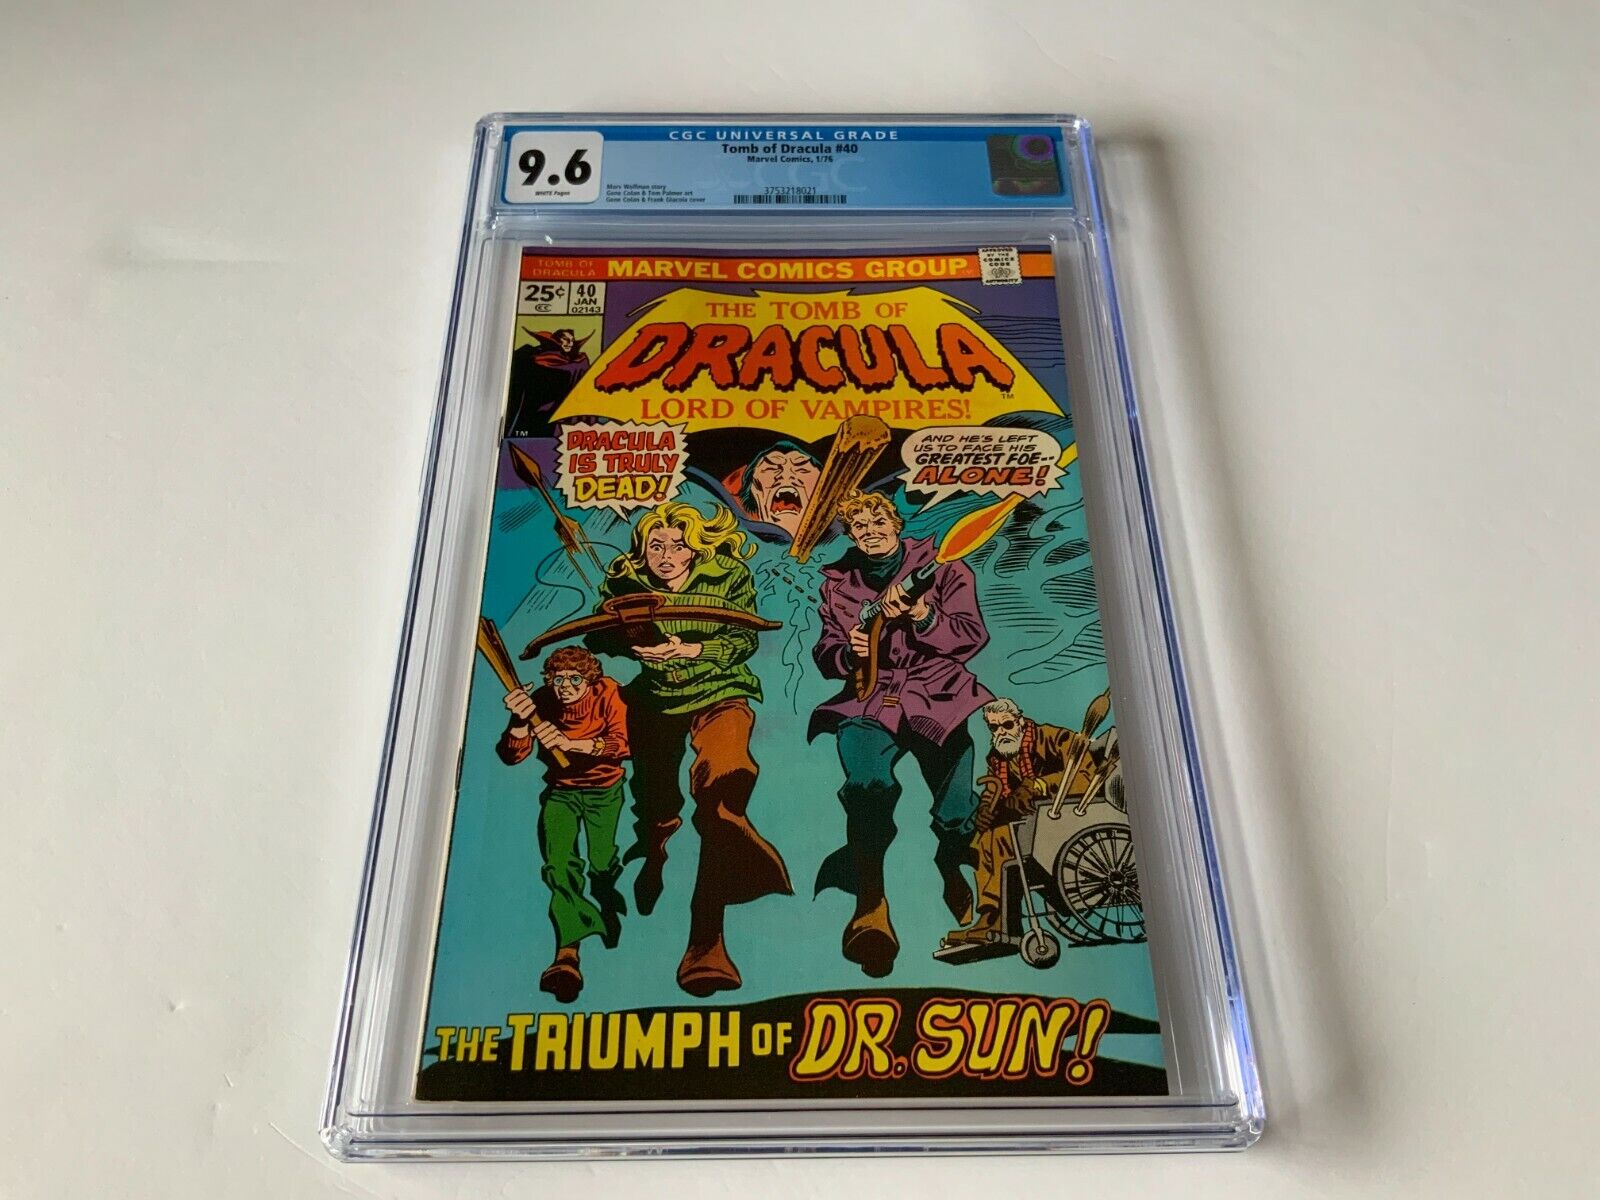 TOMB OF DRACULA 40 CGC 9.6 WHITE PAGES DOCTOR SUN MARVEL COMICS 1976 B